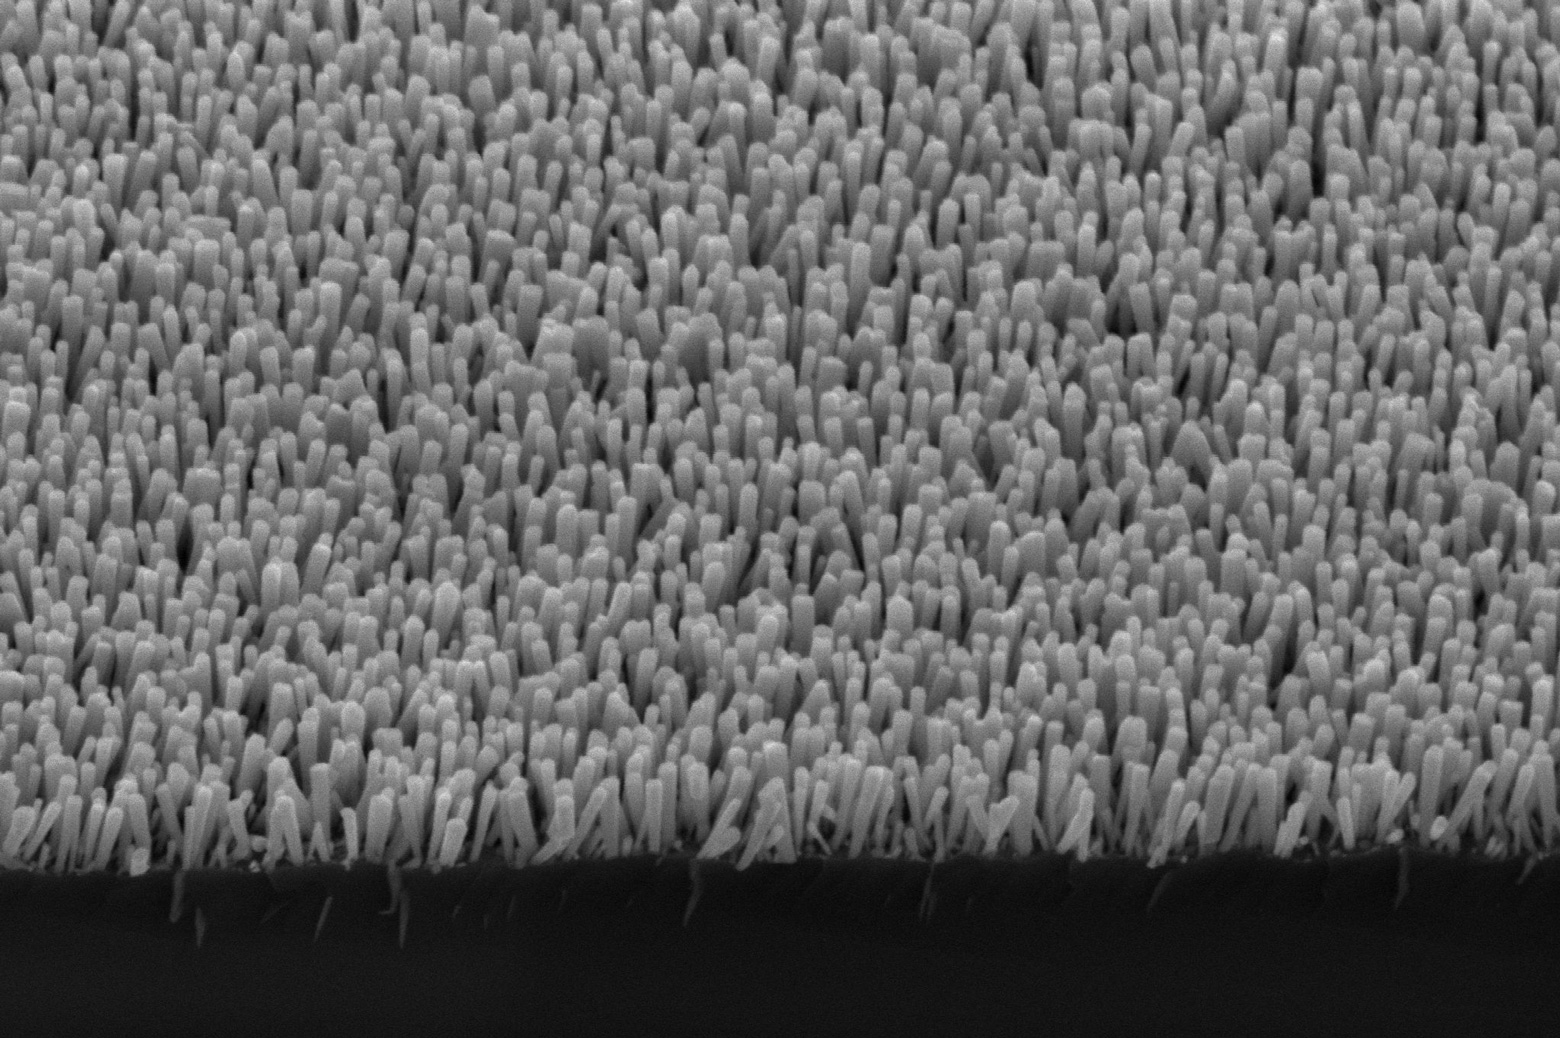 An electron microscope image shows the semiconductor nanowires. These deliver electrons to metal nanoparticles, which turn carbon dioxide and water into methane. Credit: Baowen Zhou, Mi Group, University of Michigan.